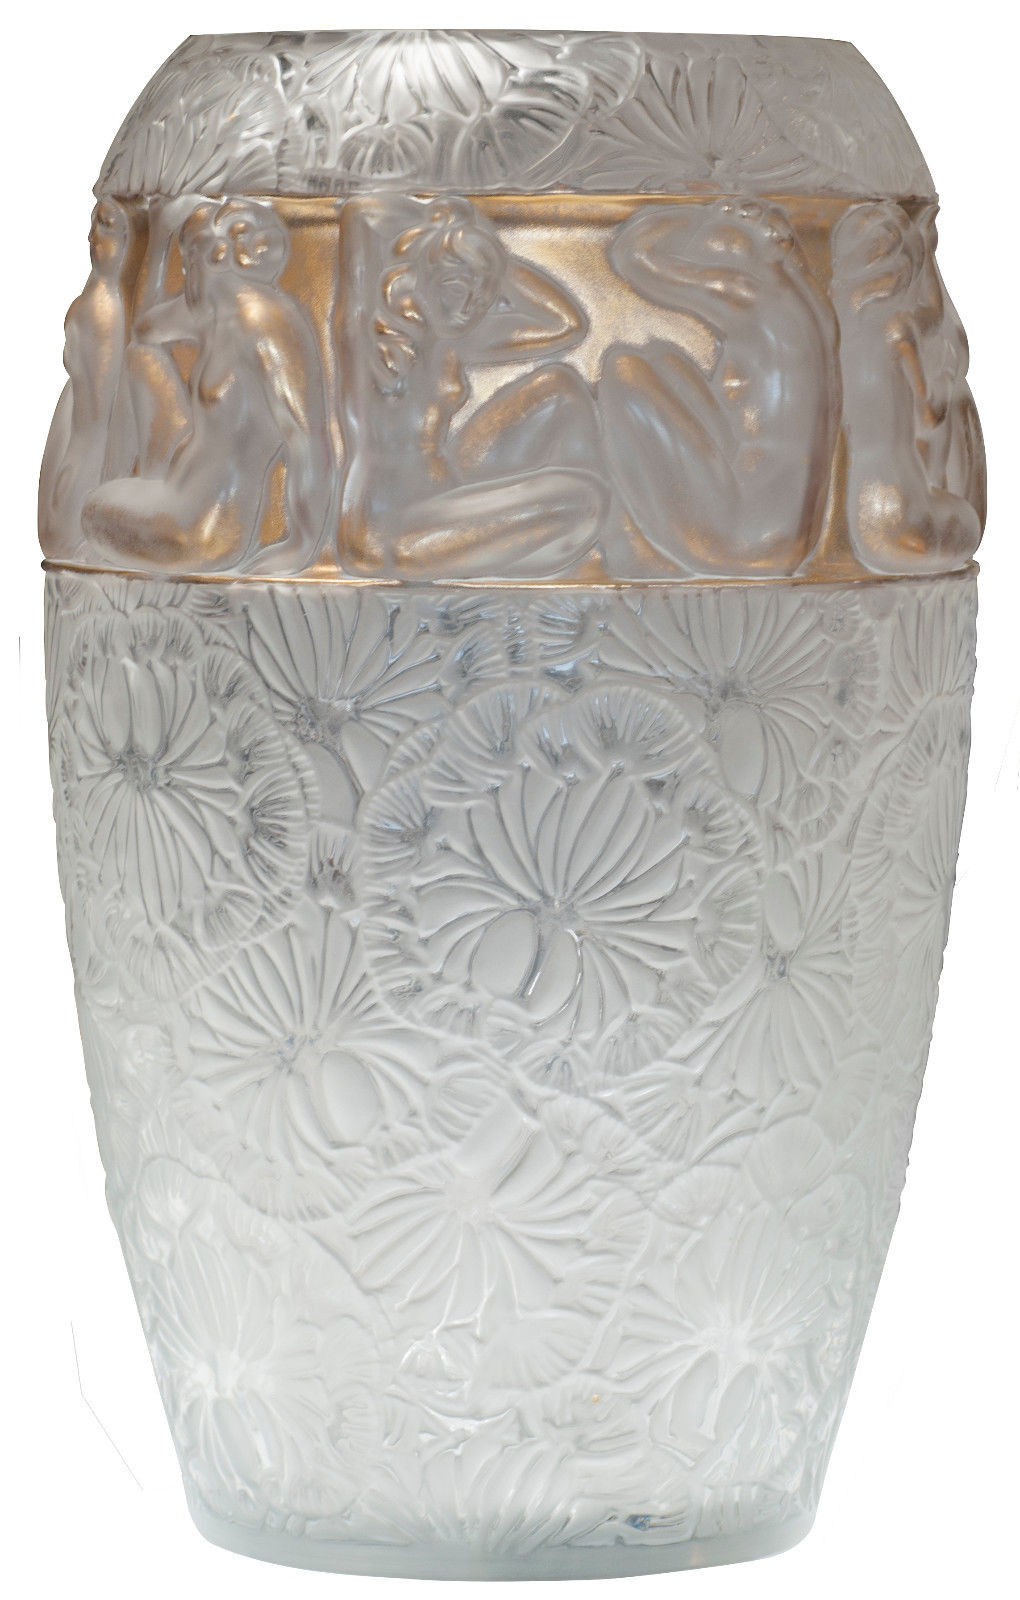 16 Popular Lalique Vases On Ebay 2024 free download lalique vases on ebay of lalique french art glass angelique vase clear gold guilding glass with regard to lalique french art glass angelique vase clear gold guilding glass limited ed